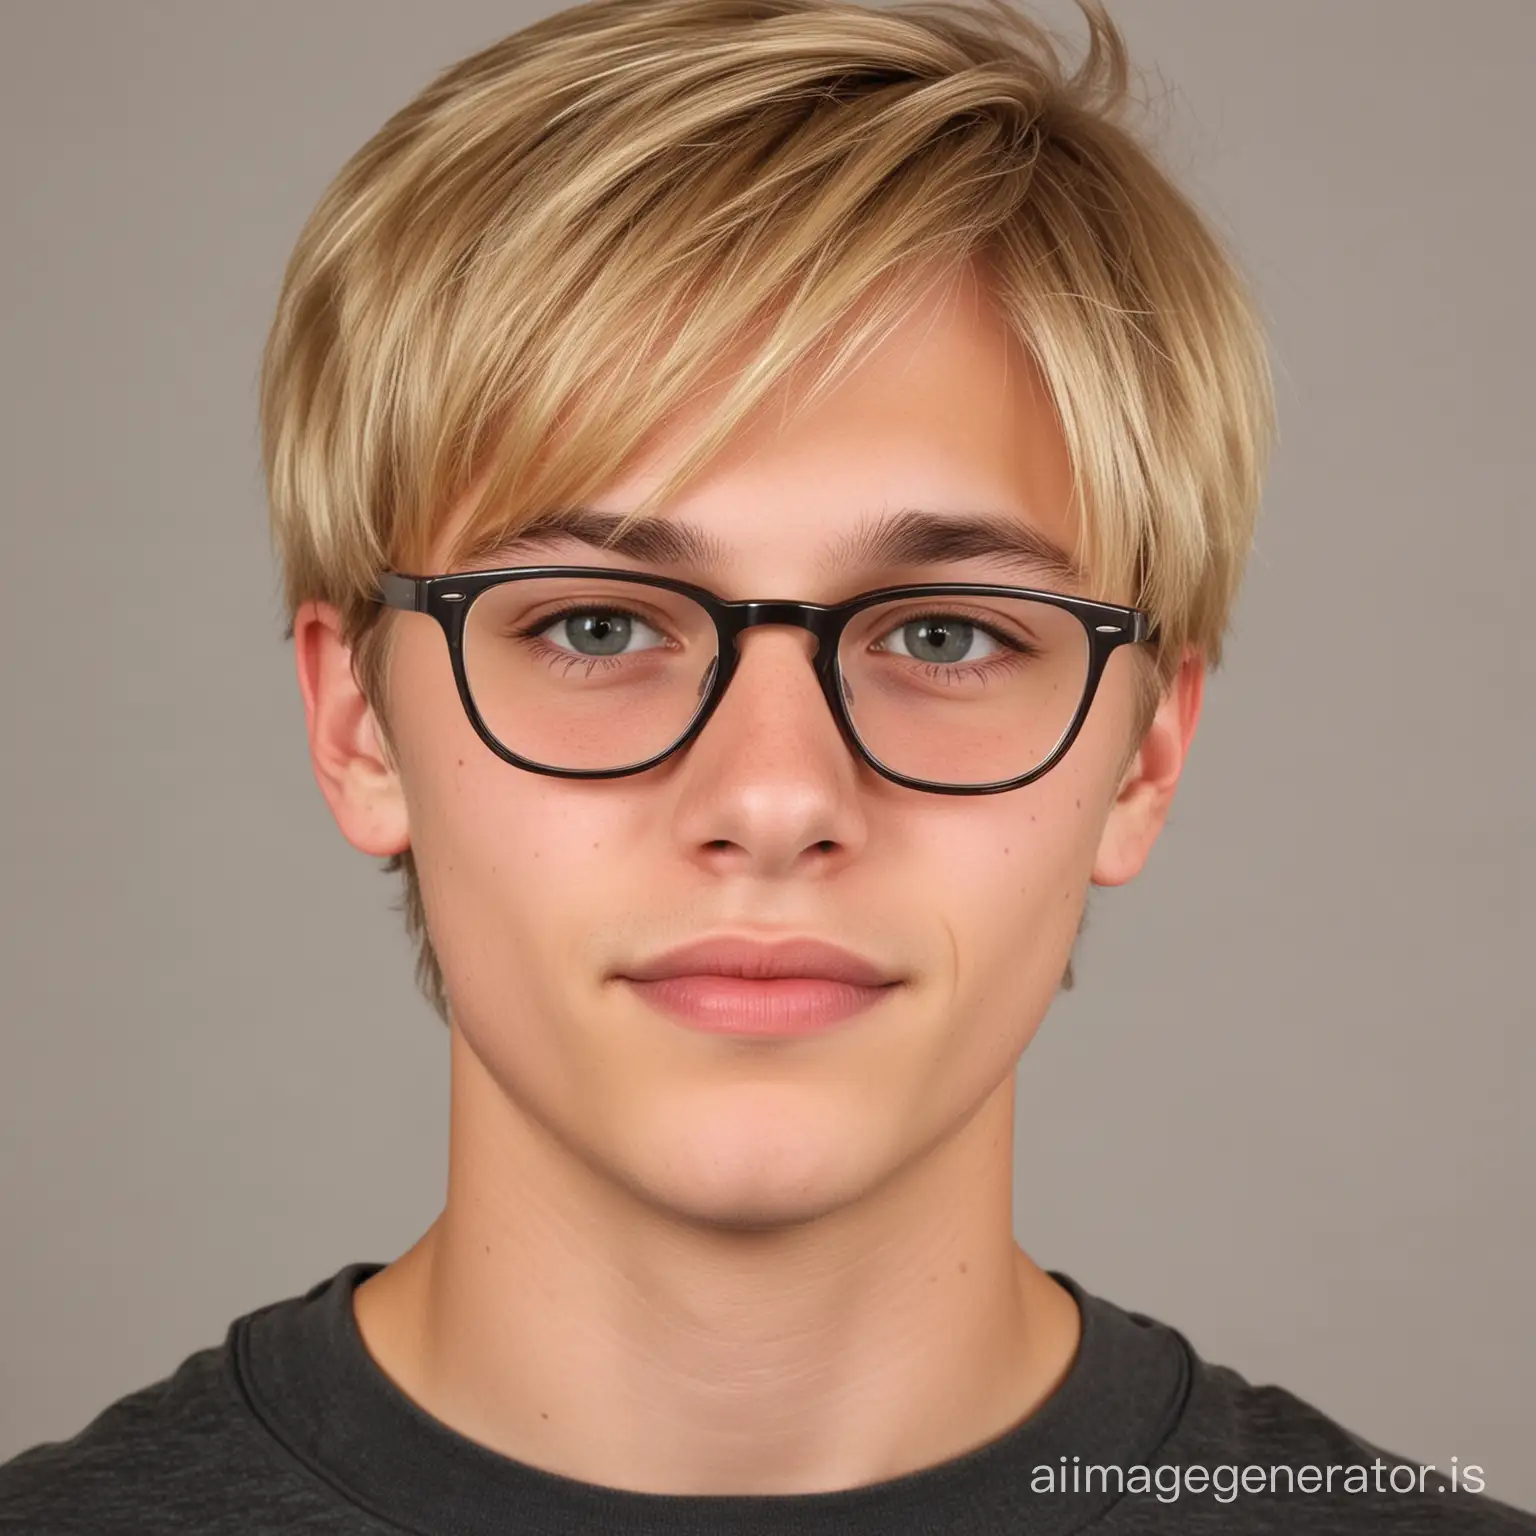 German teenage boy with blond hair and glasses